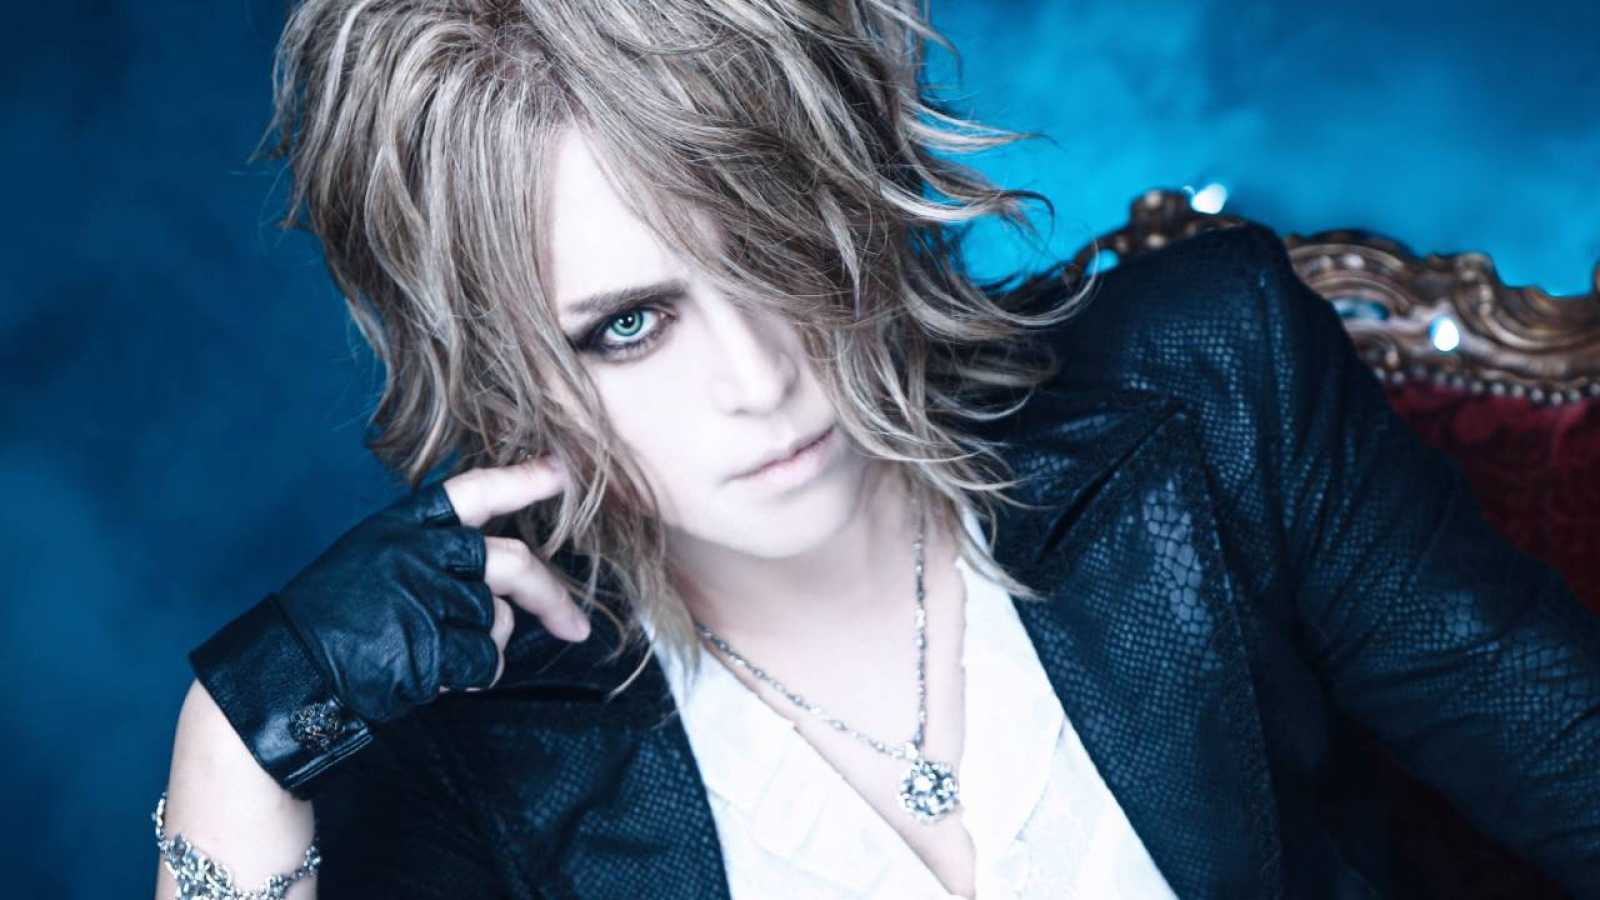 Entrevista con Kamijo © CHATEAU AGENCY CO., Ltd. All rights reserved.